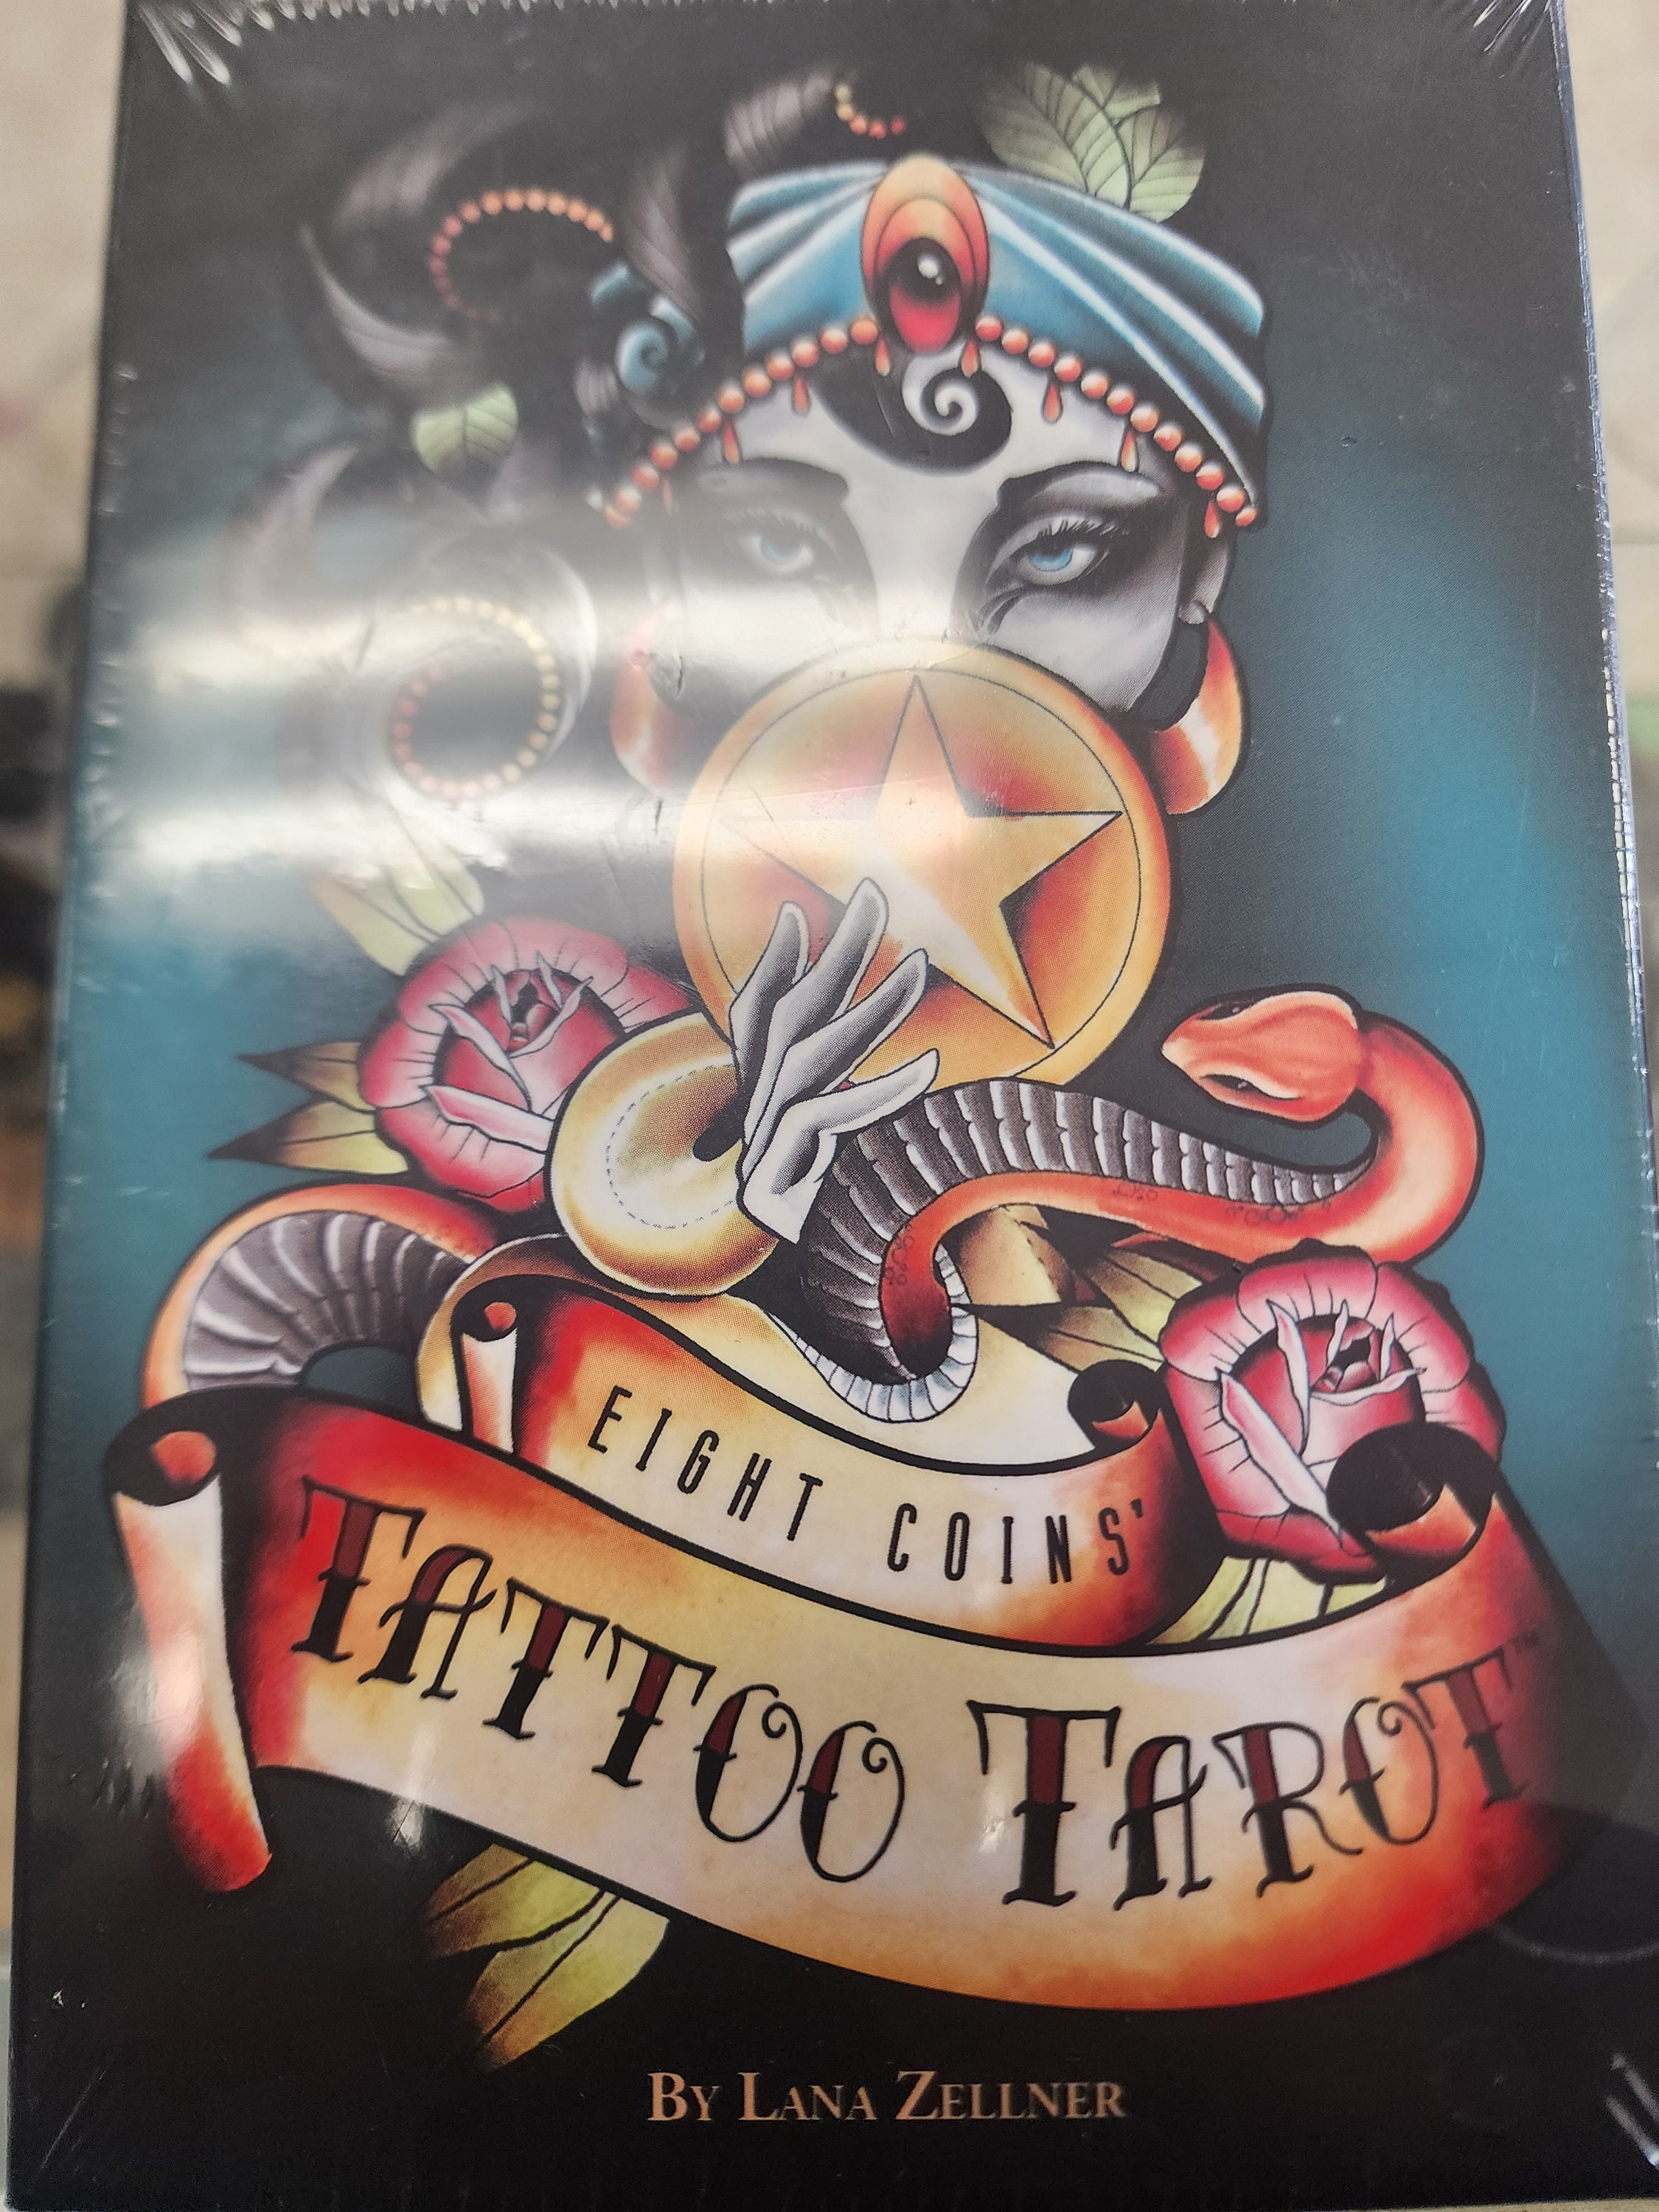 Eight Coins Tattoo Tarot 82 Card Deck By Lana Zellner With Book COMPLETE   eBay